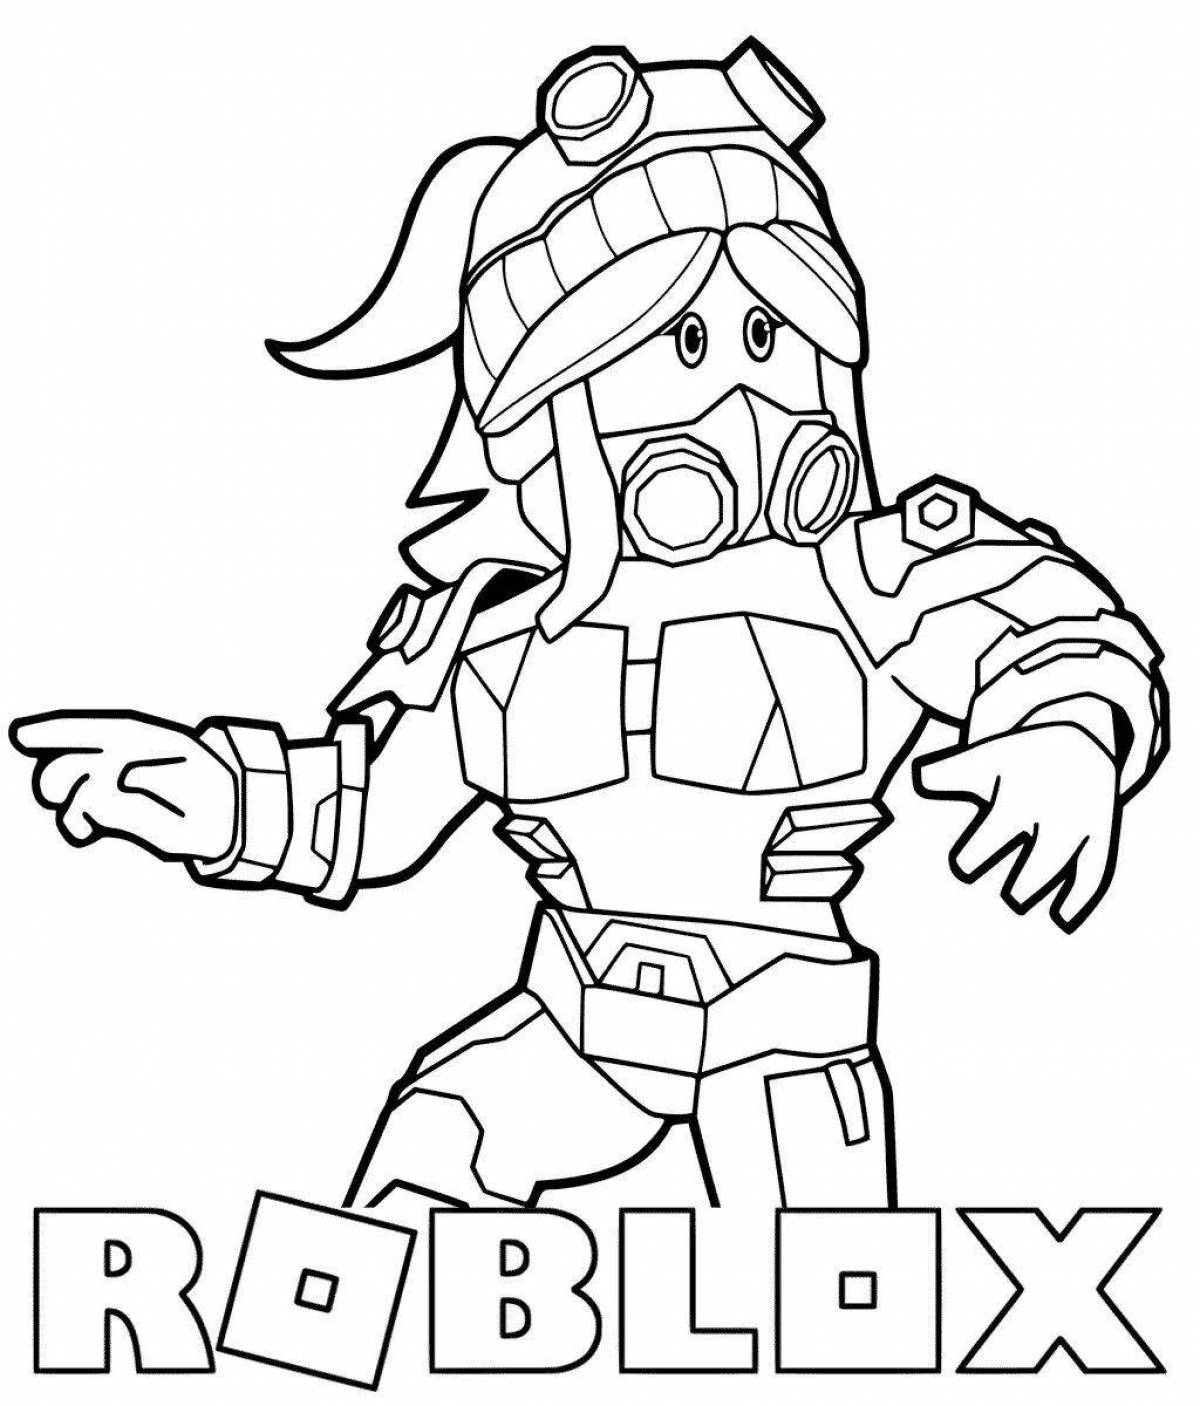 Color-dynamic roblox coloring page for boys 10 years old